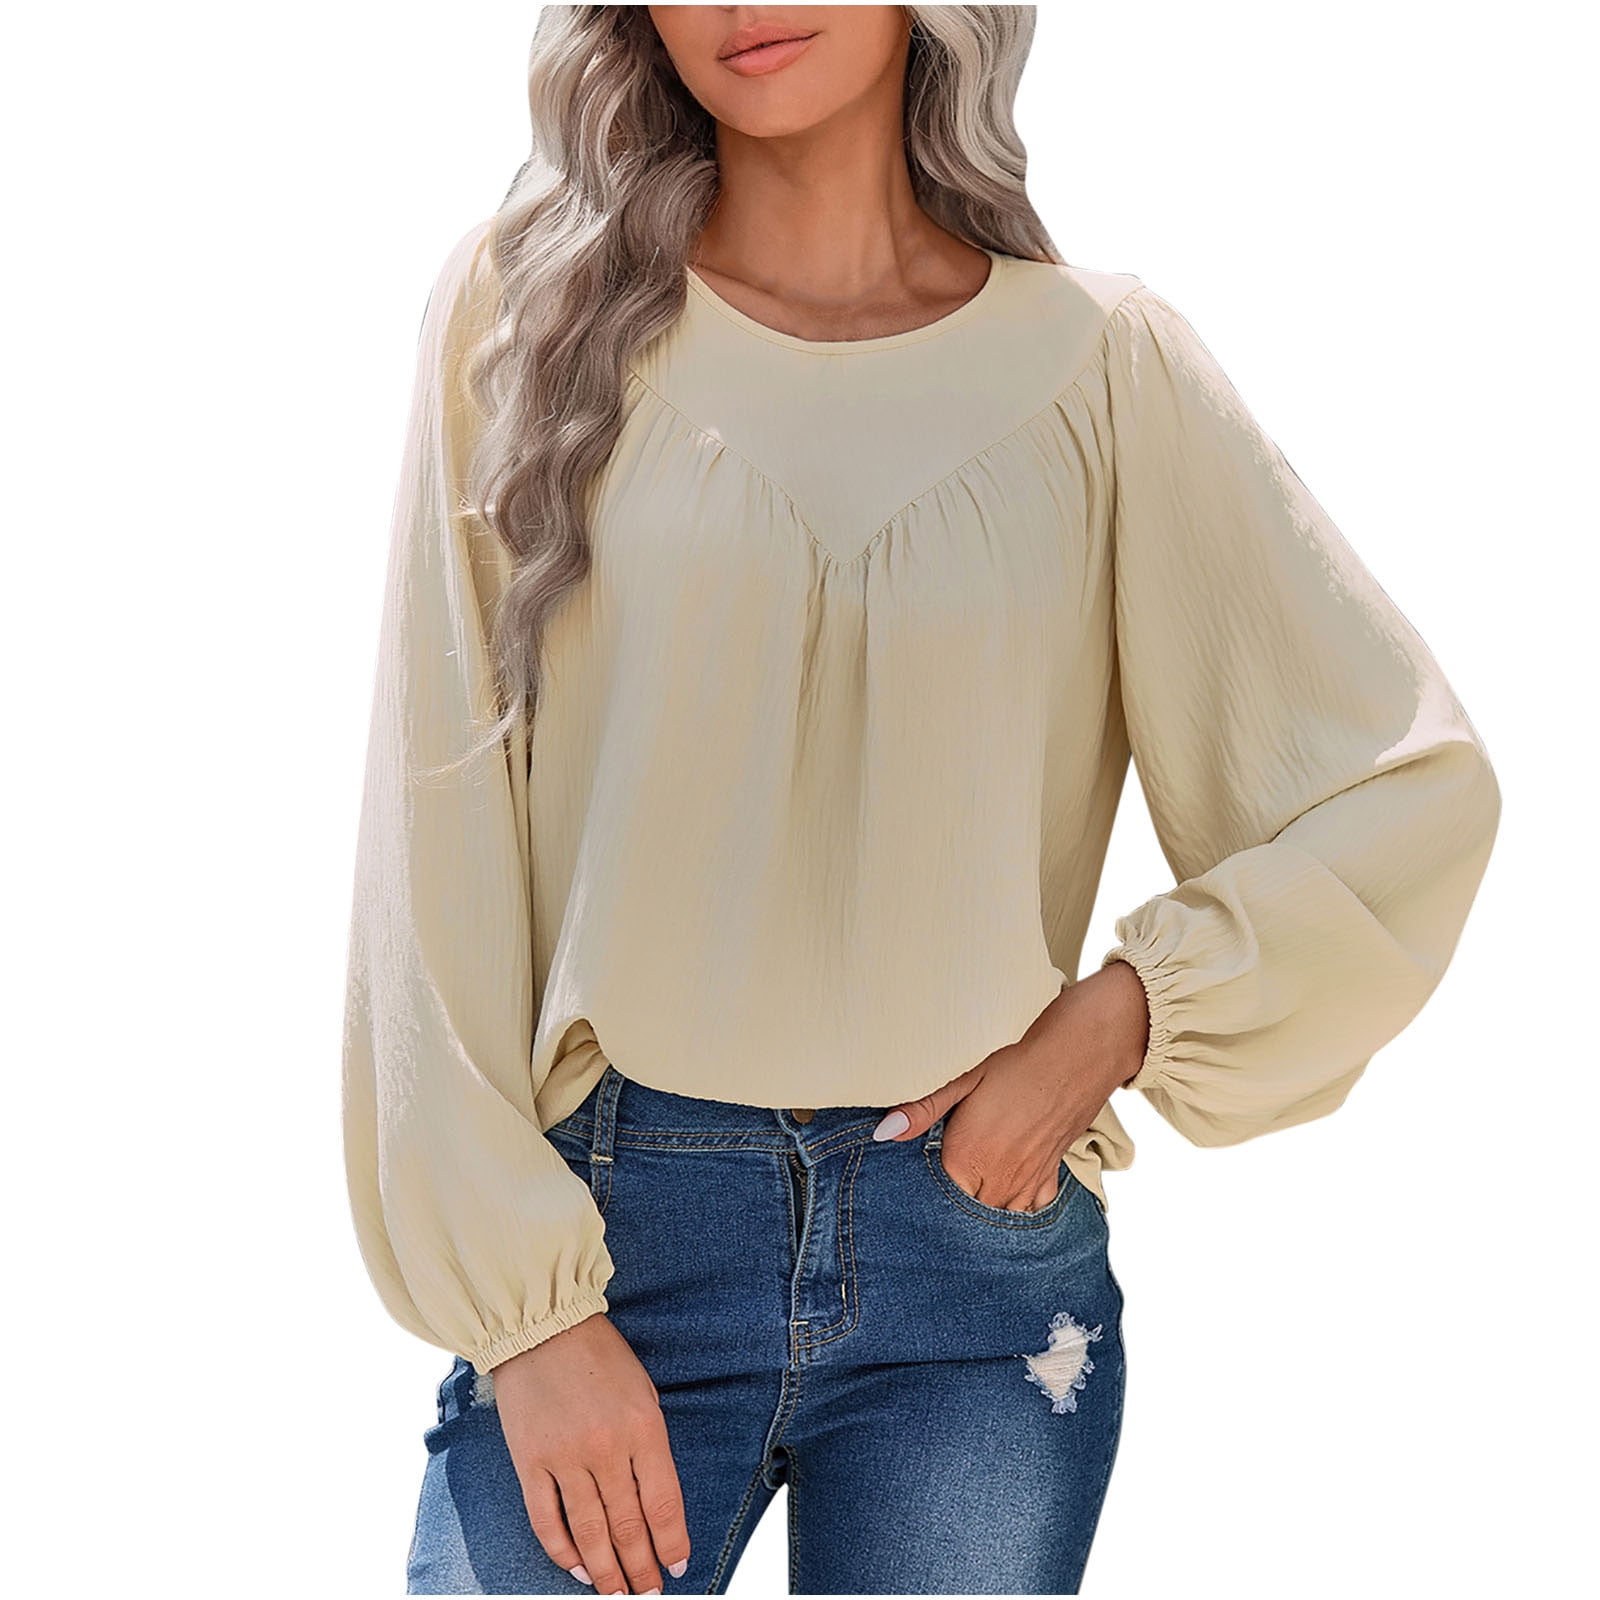 Long Sleeve Business Casual Tops For Women Solid Nepal